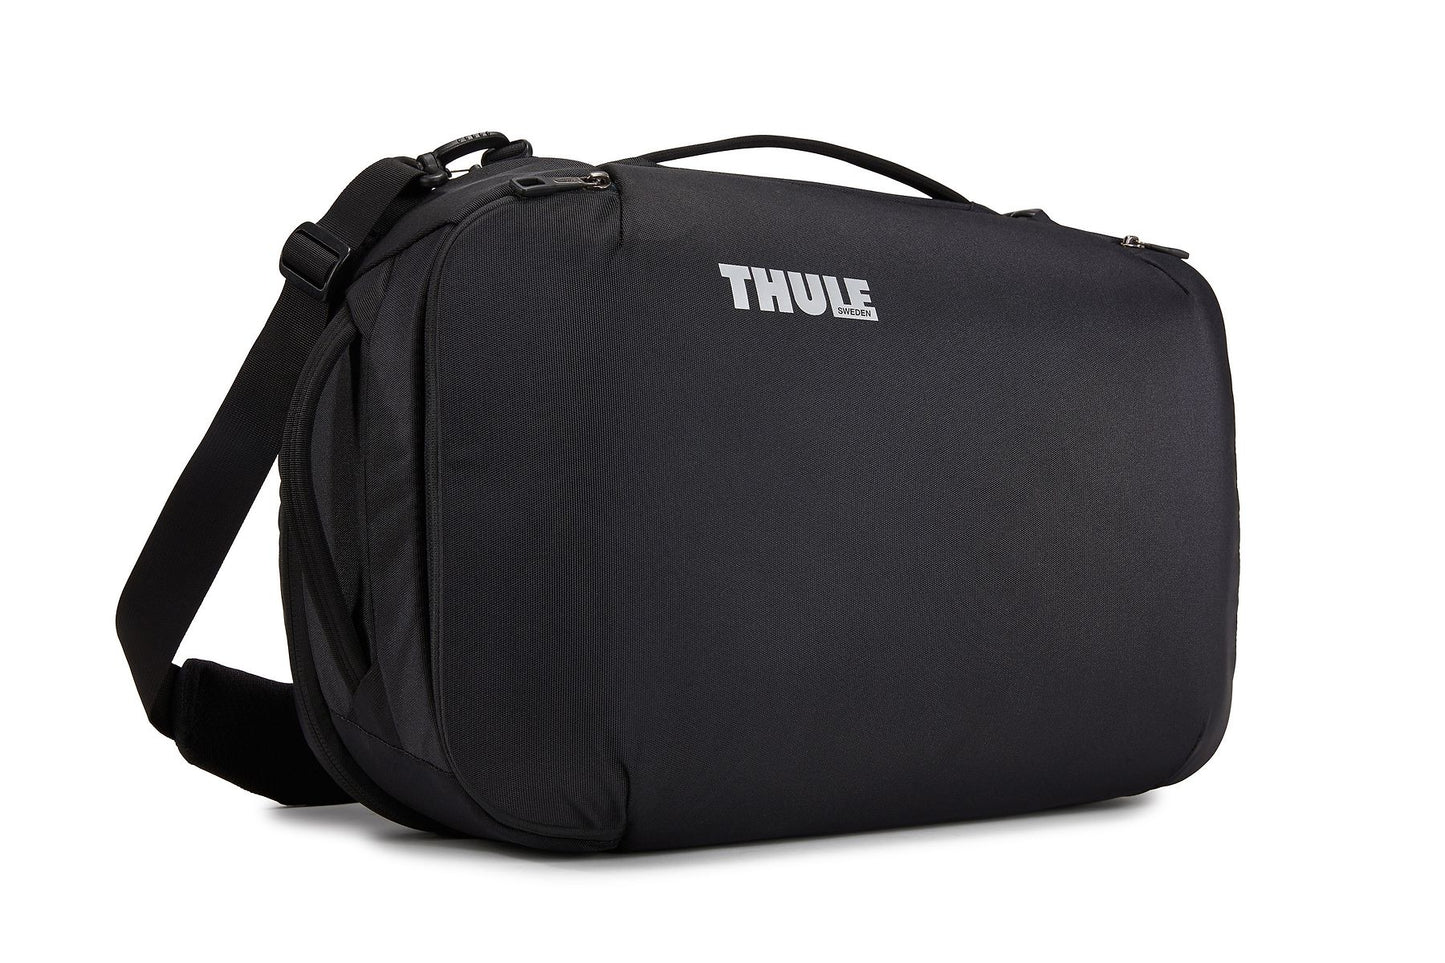 THULE Subterra 40L convertible carry-on backpack/duffel